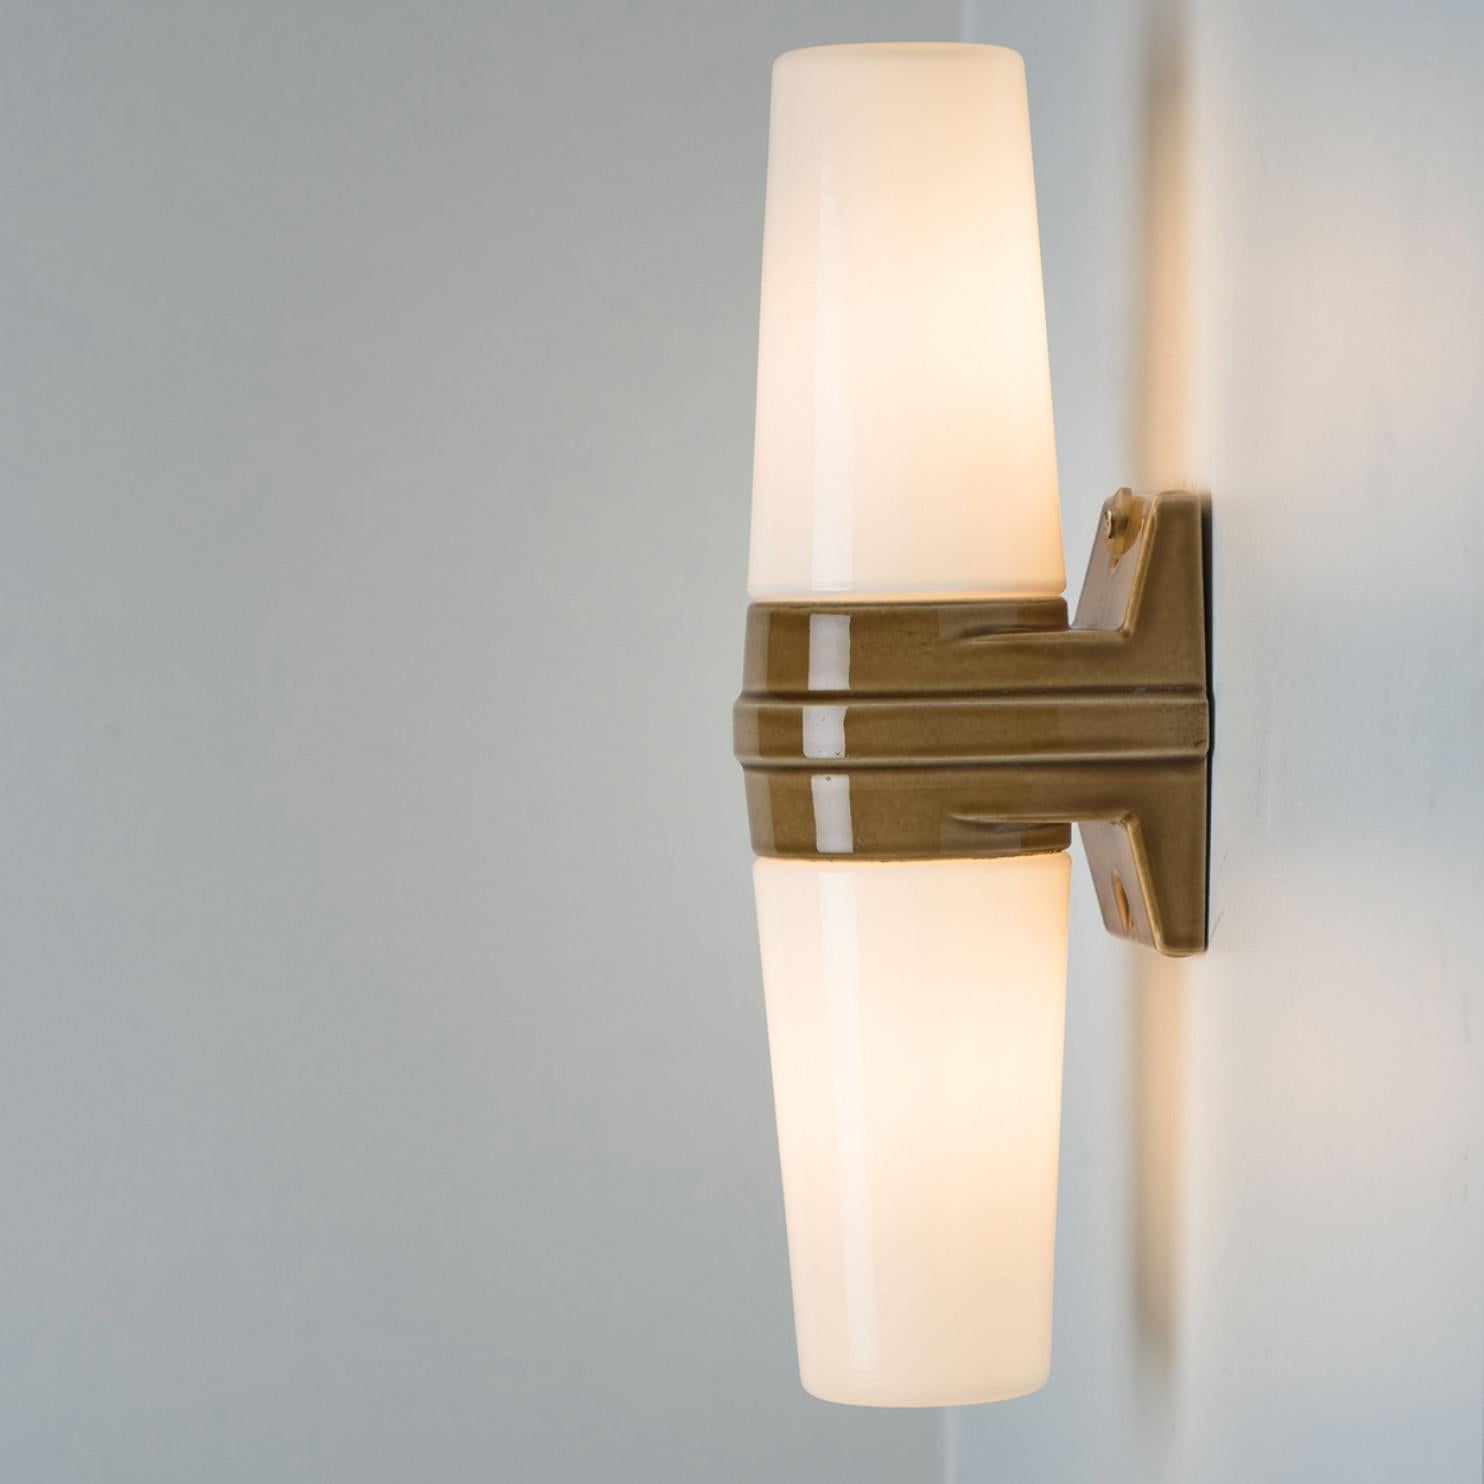 Late 20th Century Pair of White and Brown Ceramic Wall Lights, Sweden, 1970 For Sale